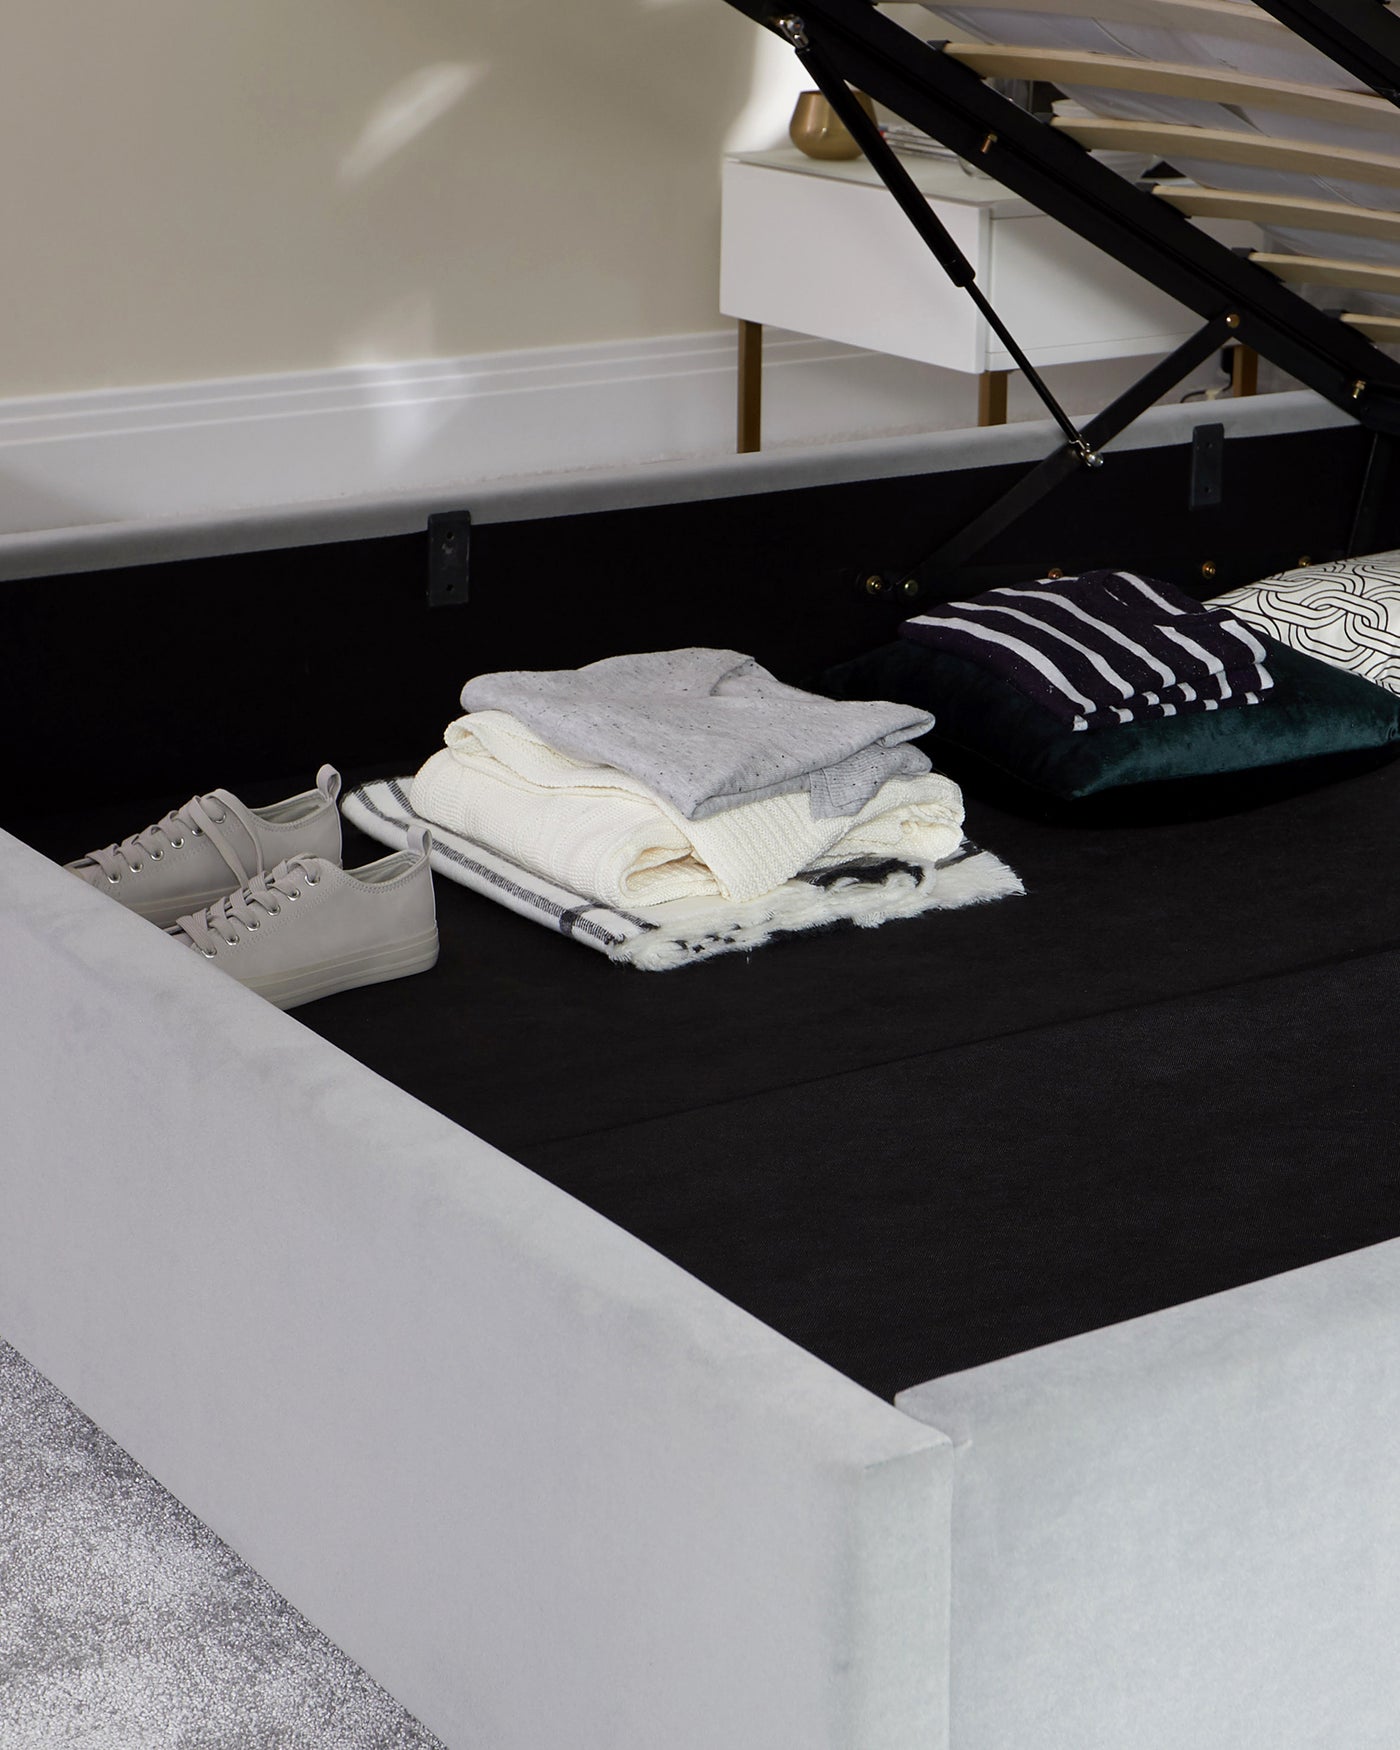 Modern storage bed with a lifted mattress platform revealing an ample under-bed storage area. The bed features dark upholstery and a simple yet chic headboard. The visible part of the bed frame suggests a contemporary design suited for minimalist or modern bedrooms.